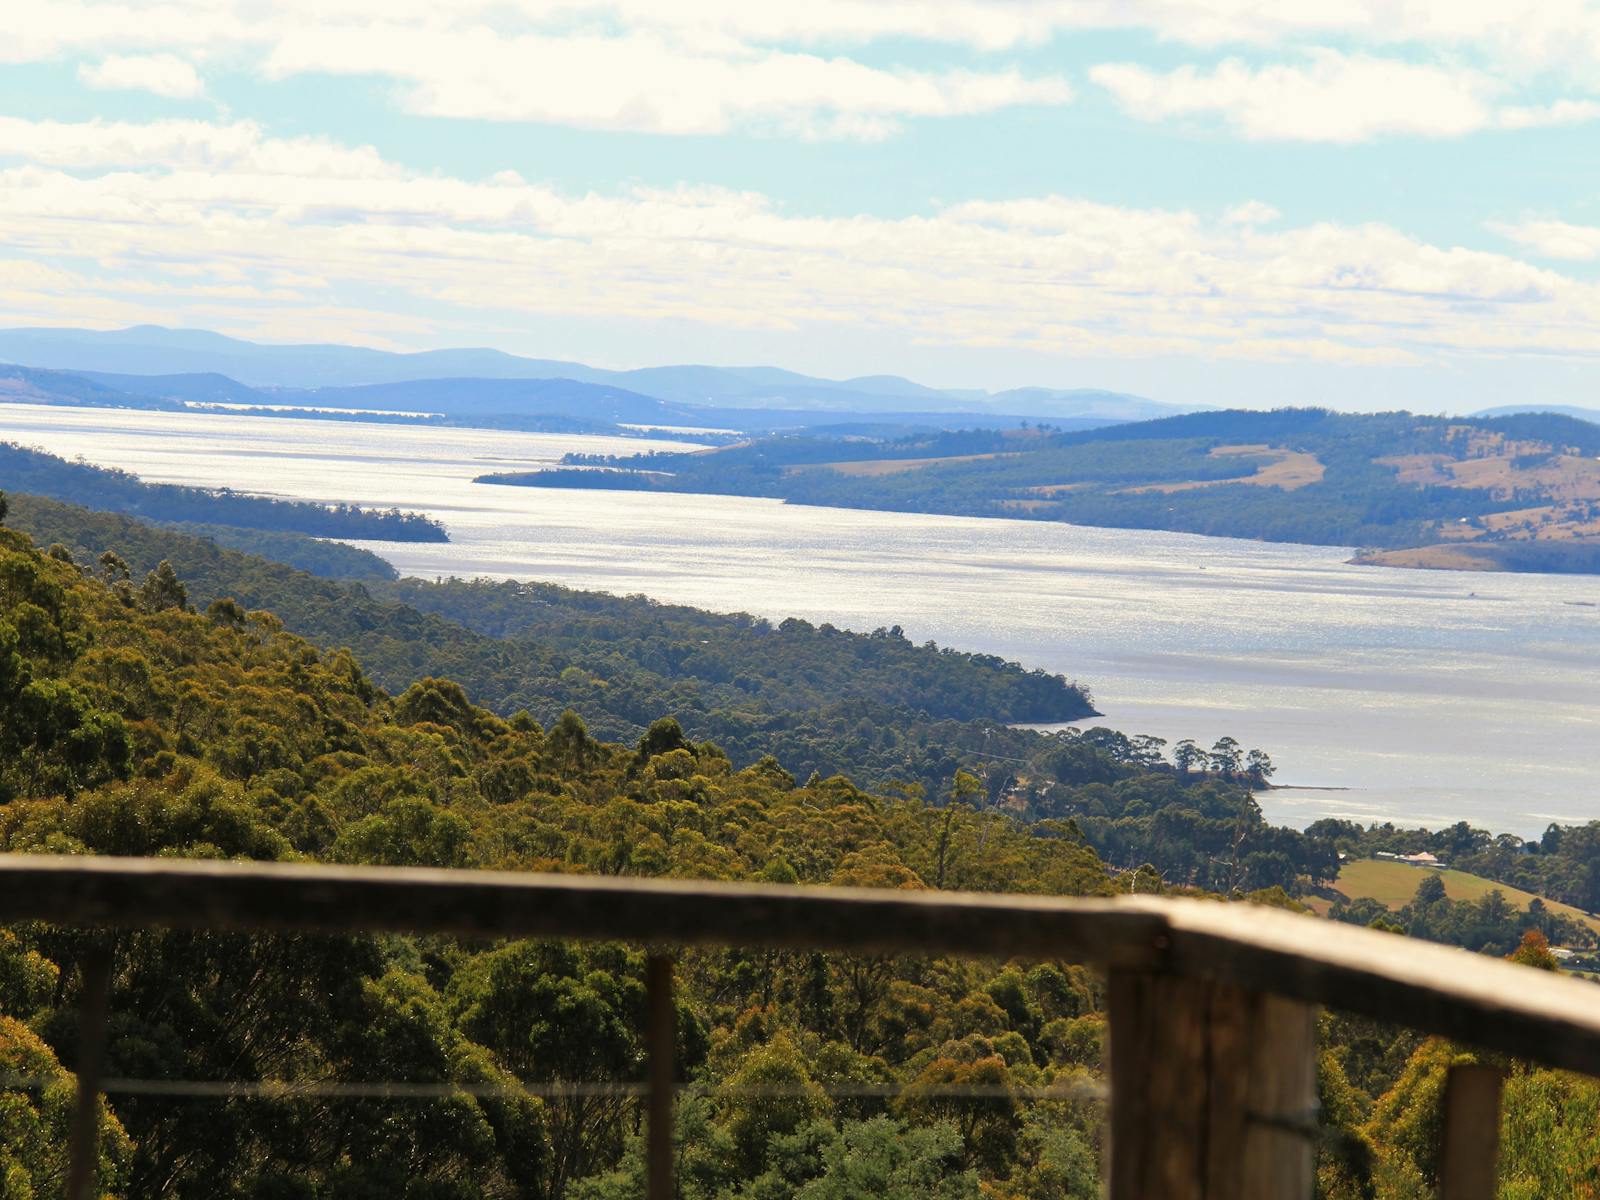 Bruny Island and D'entrecasteaux Channel from the balcony